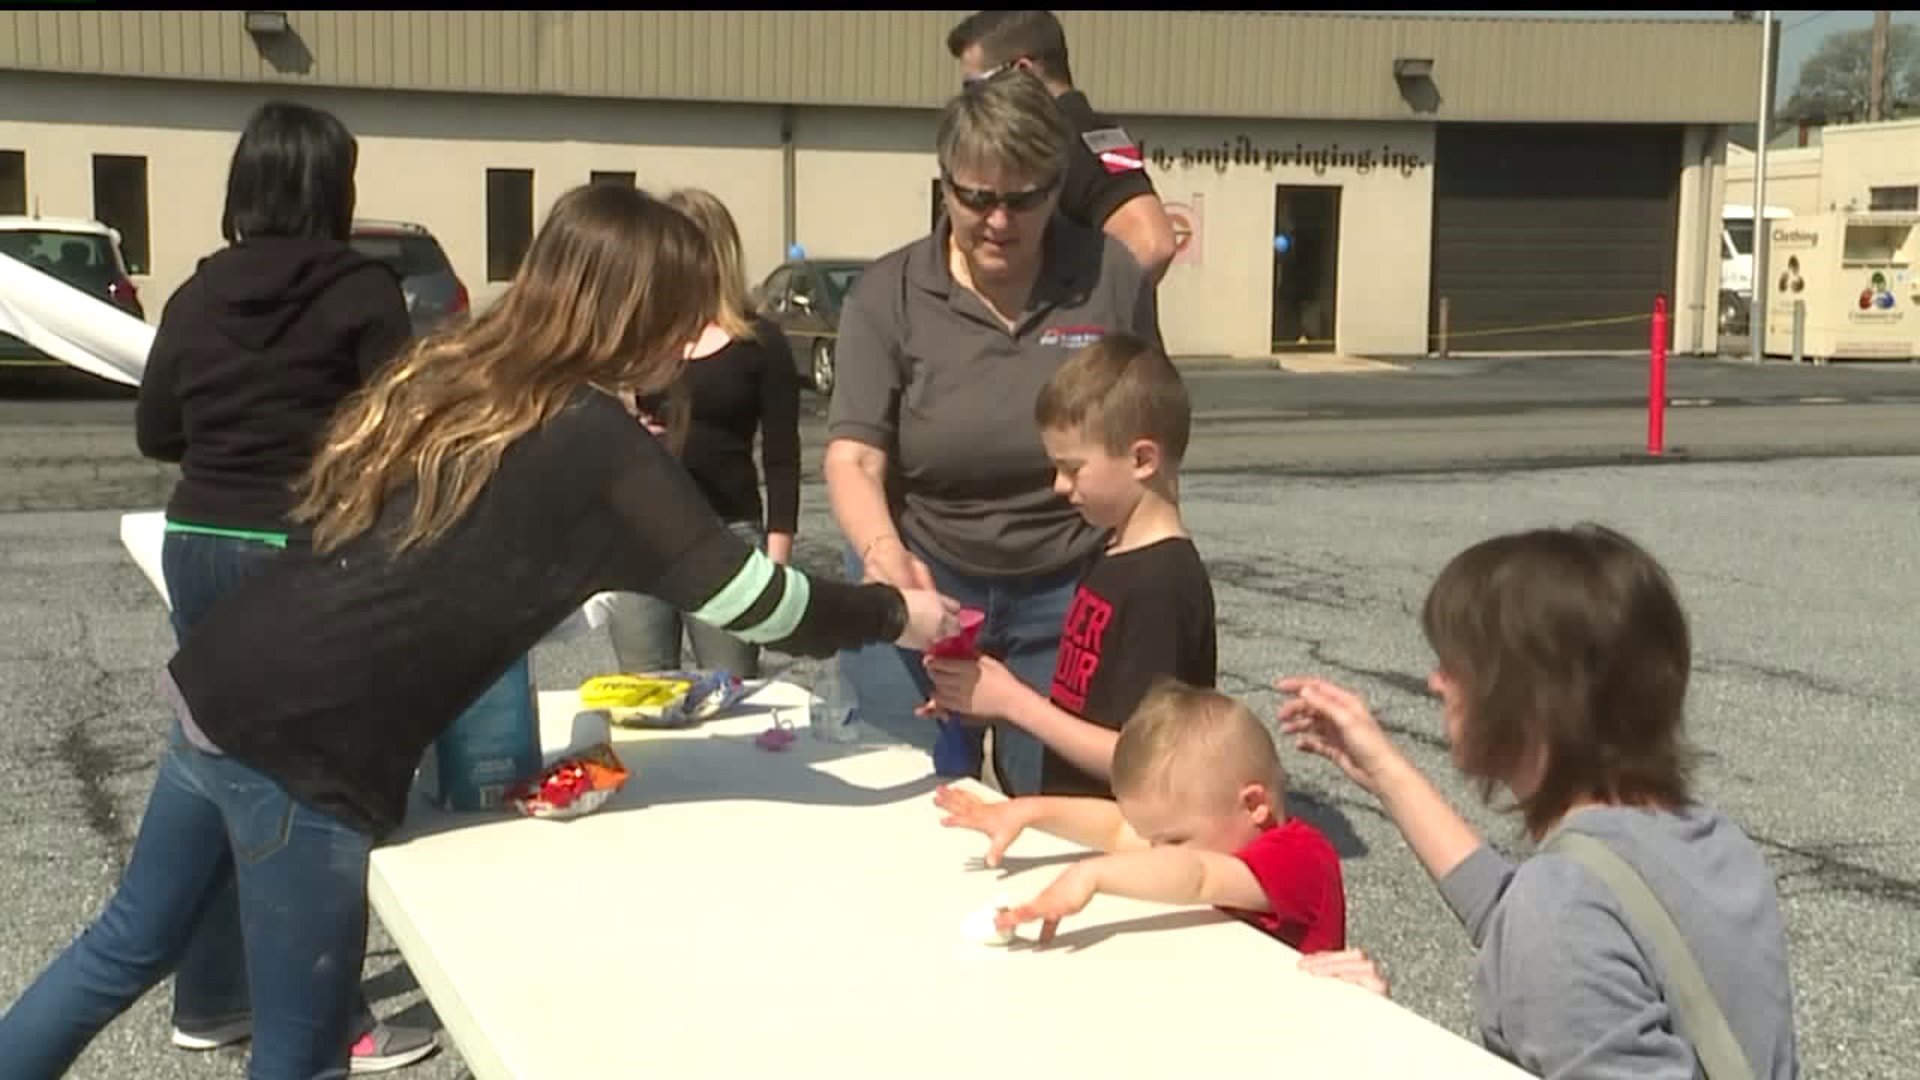 First responders unite with children with autism in Harrisburg